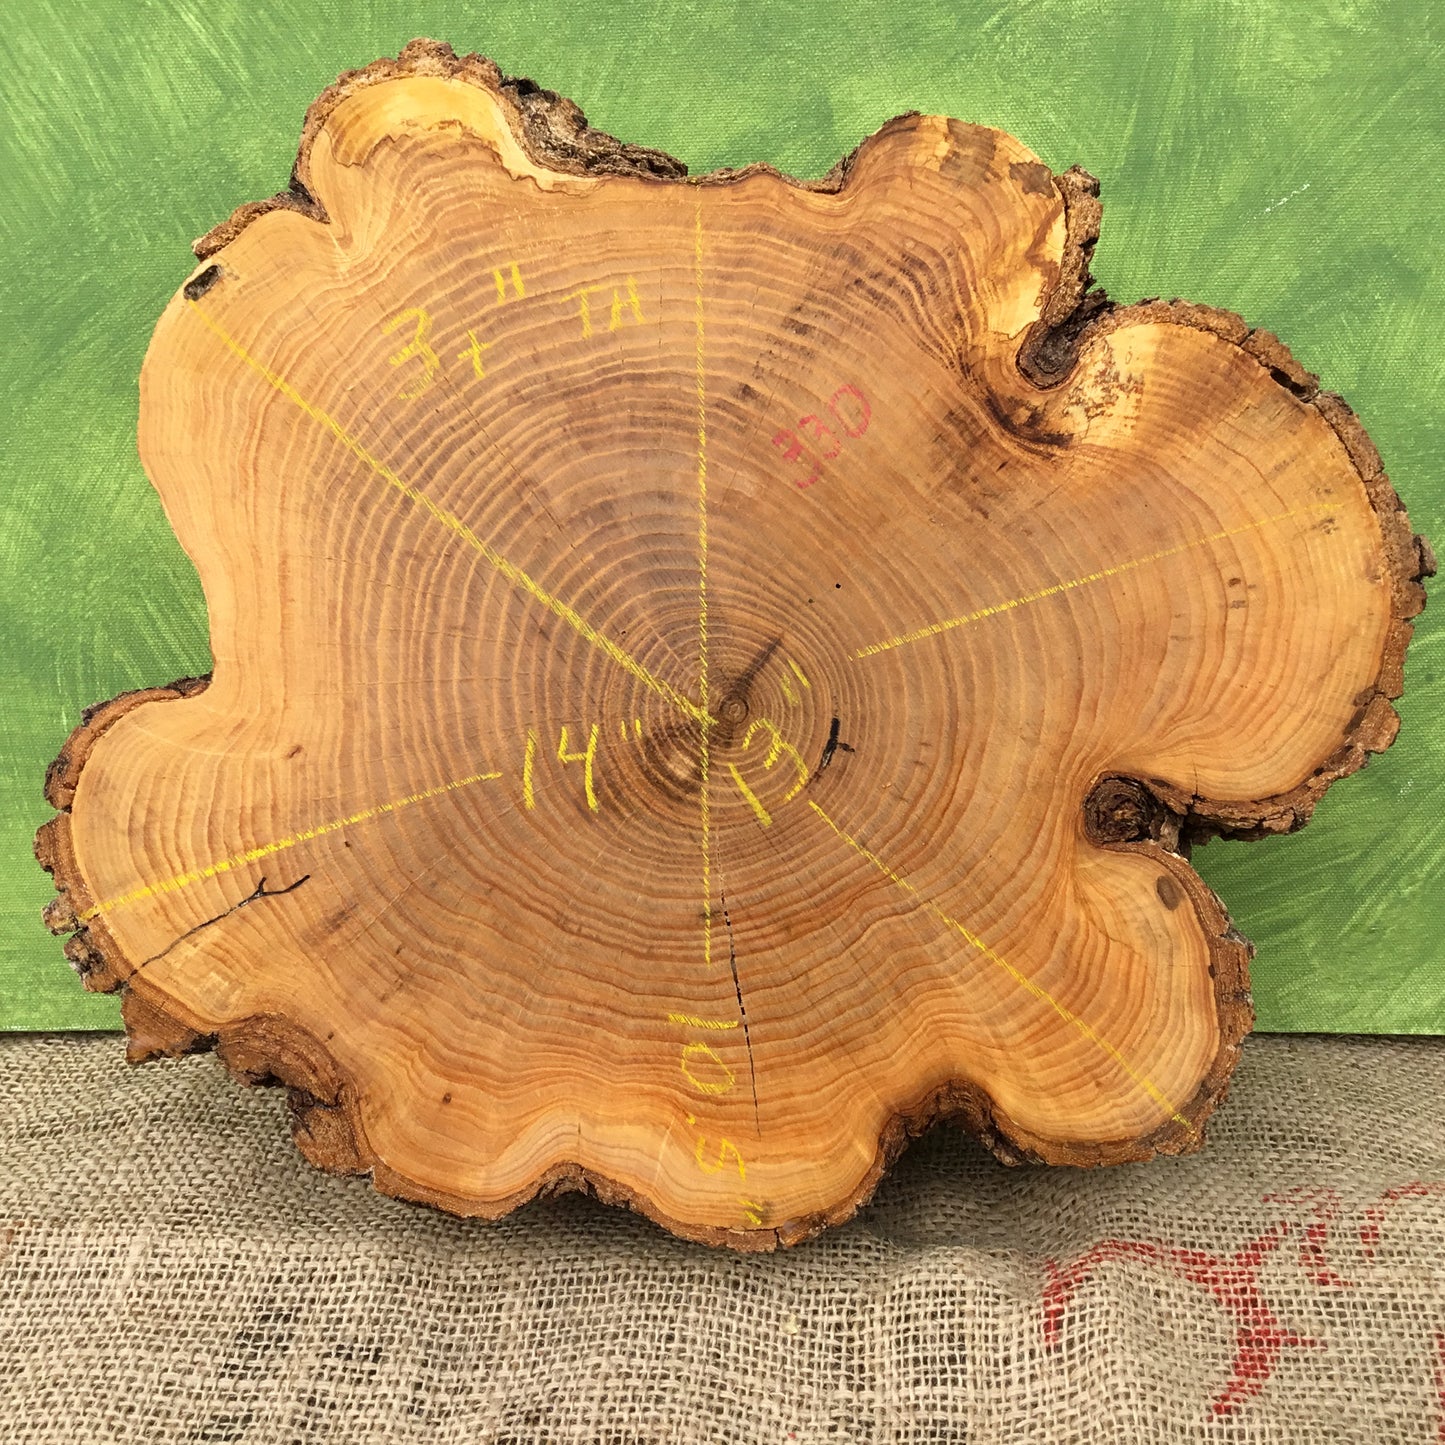 Lightly Spalted Ash Wood Cross Section - Live Edge Wood Slice - 10.5"-14" x 3+"